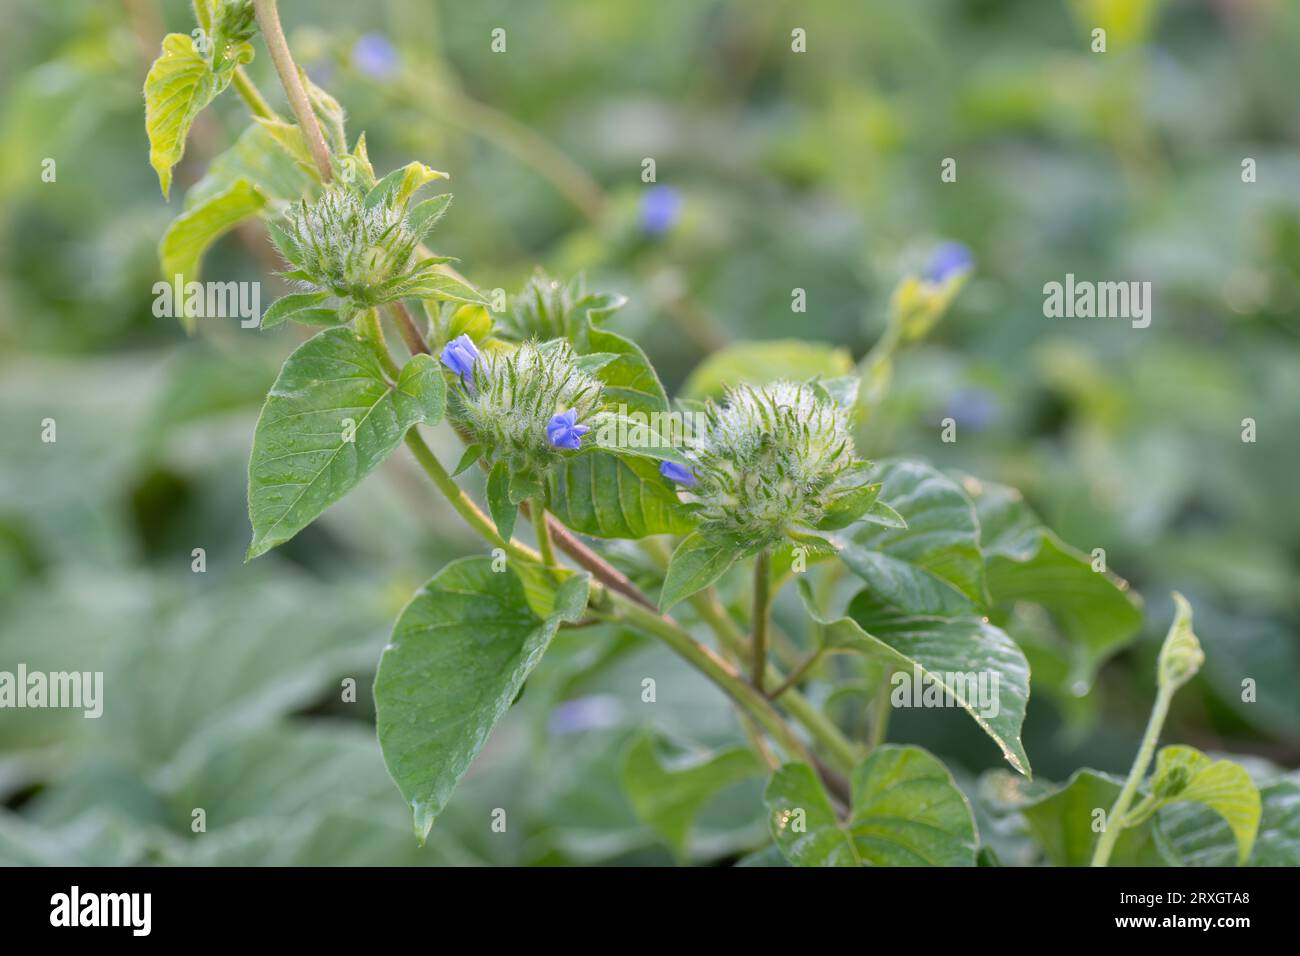 Jacquemontia tamnifolia flowers on the sandy surface of recently cleared land, its fuzzy, blooming clusters easily identifed in the open landscape. Stock Photo